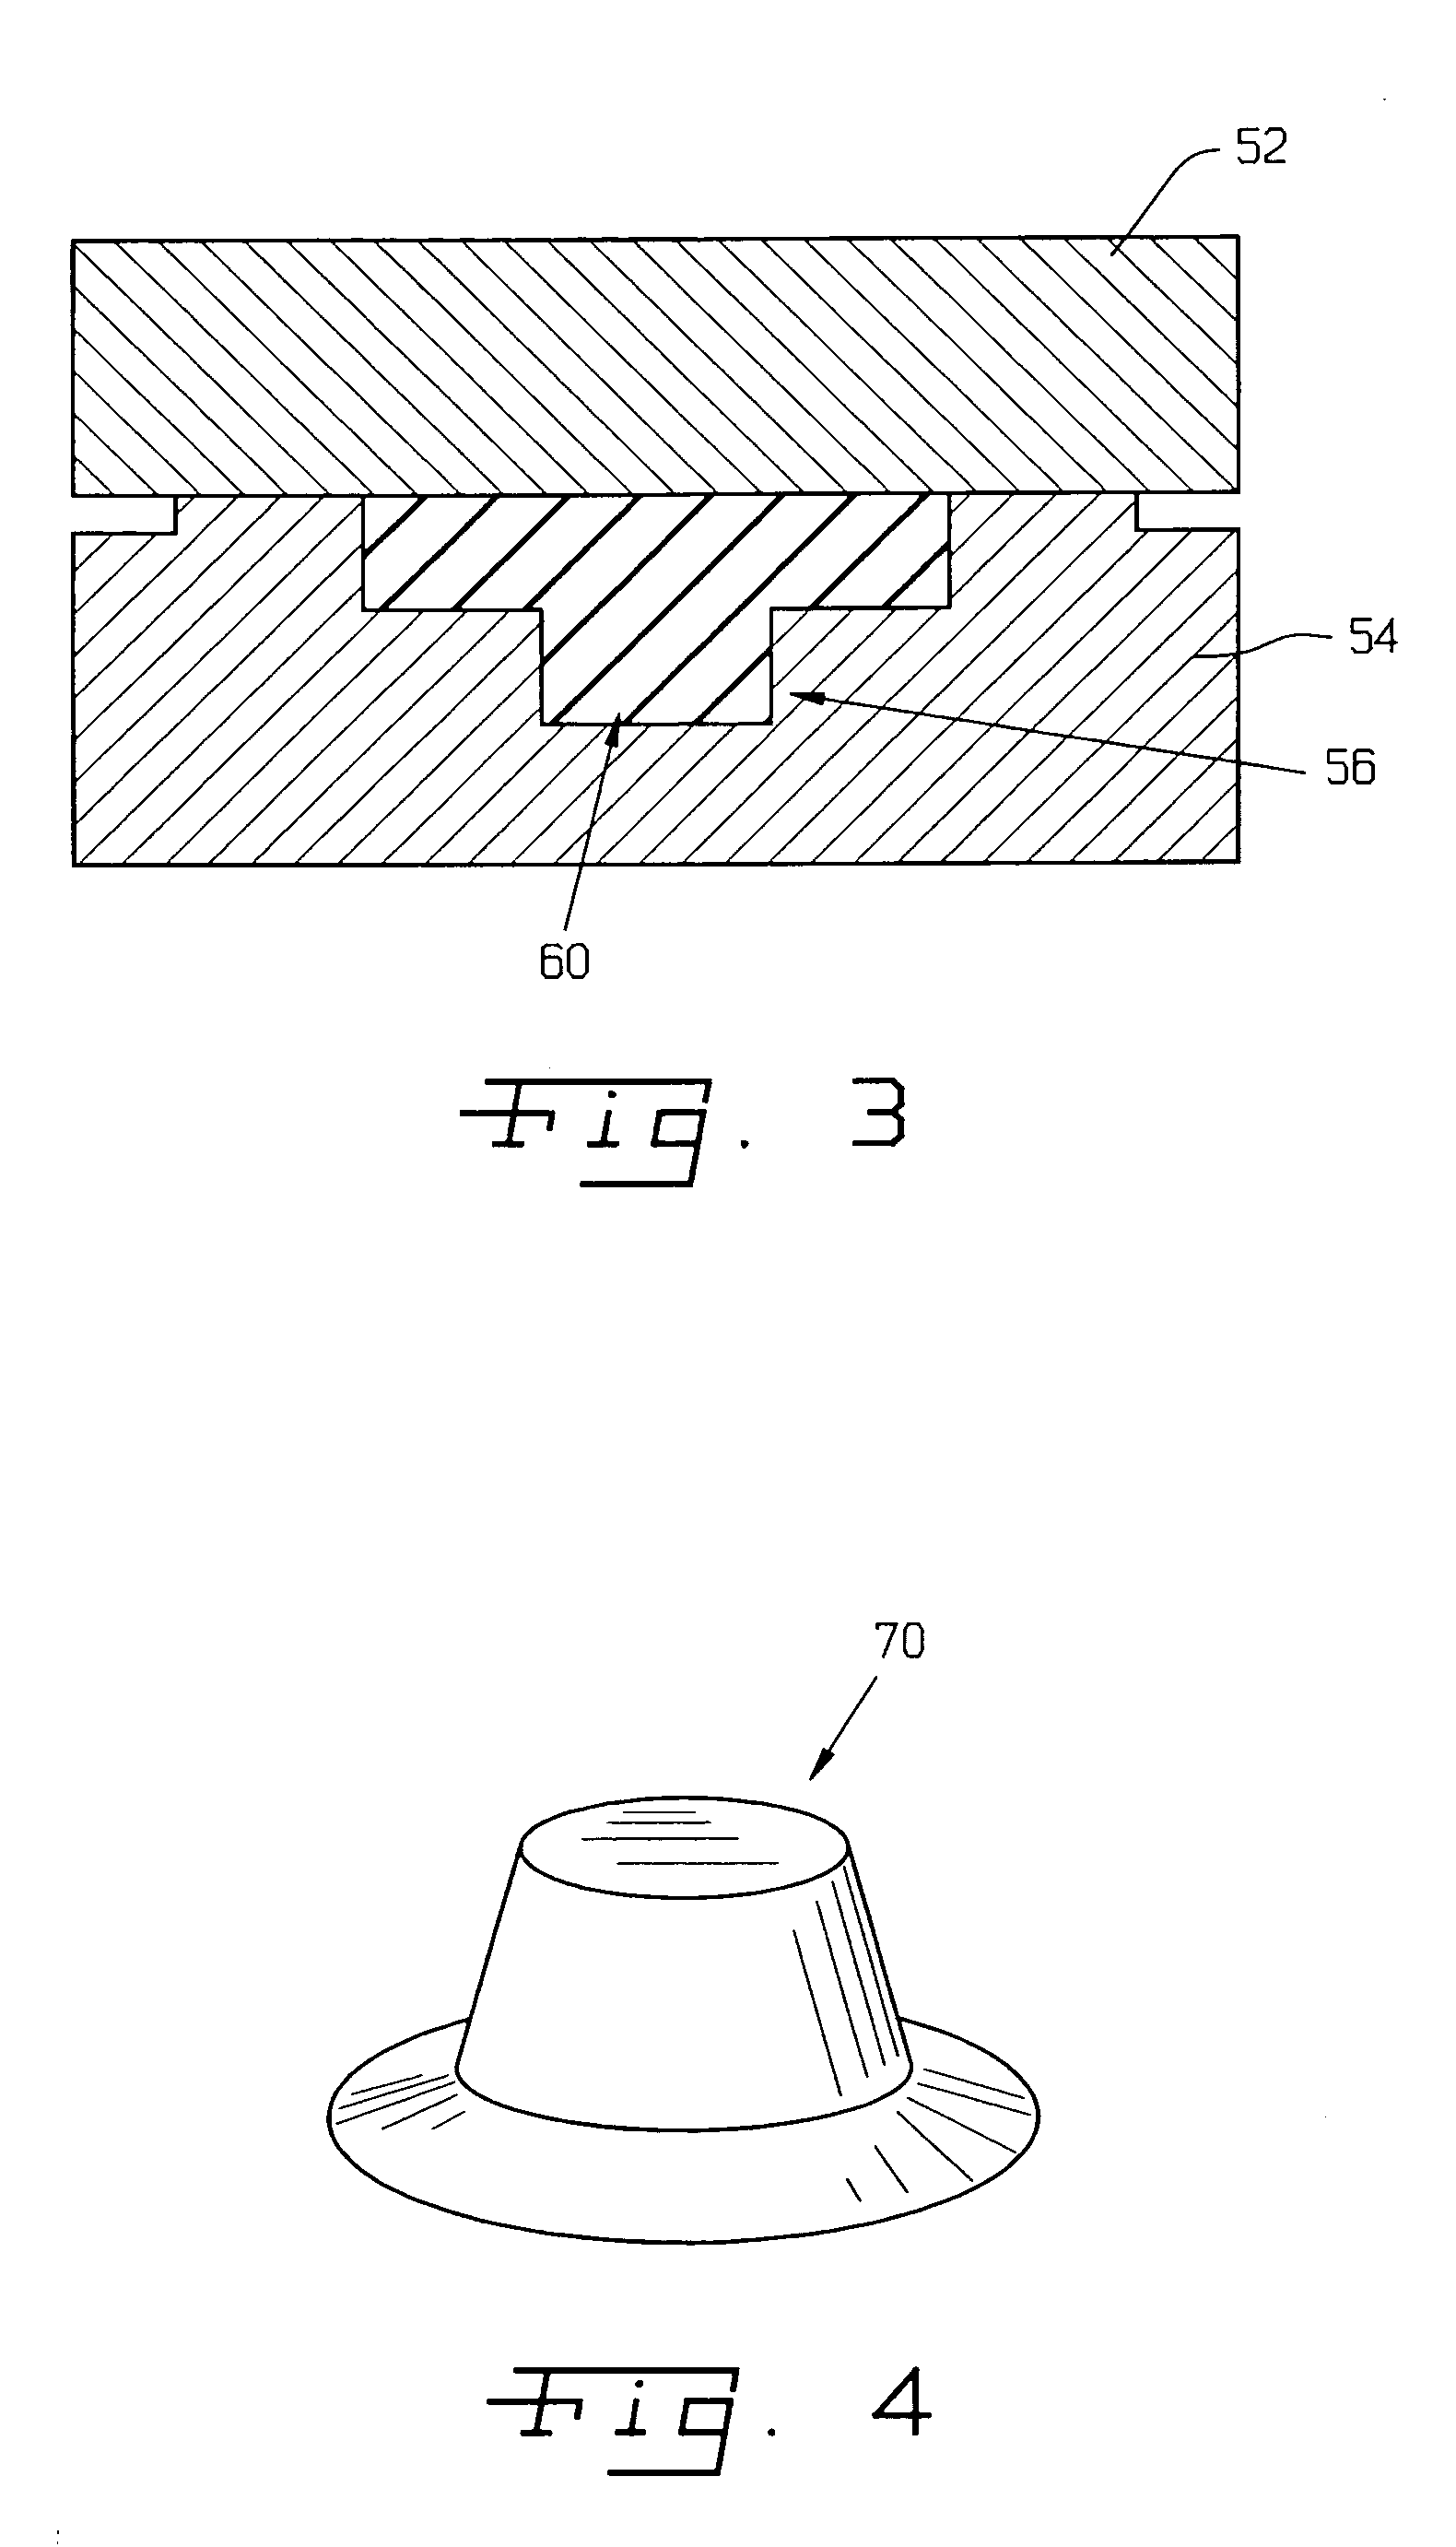 Diaphragm article with fiber reinforcement and method of manufacturing same